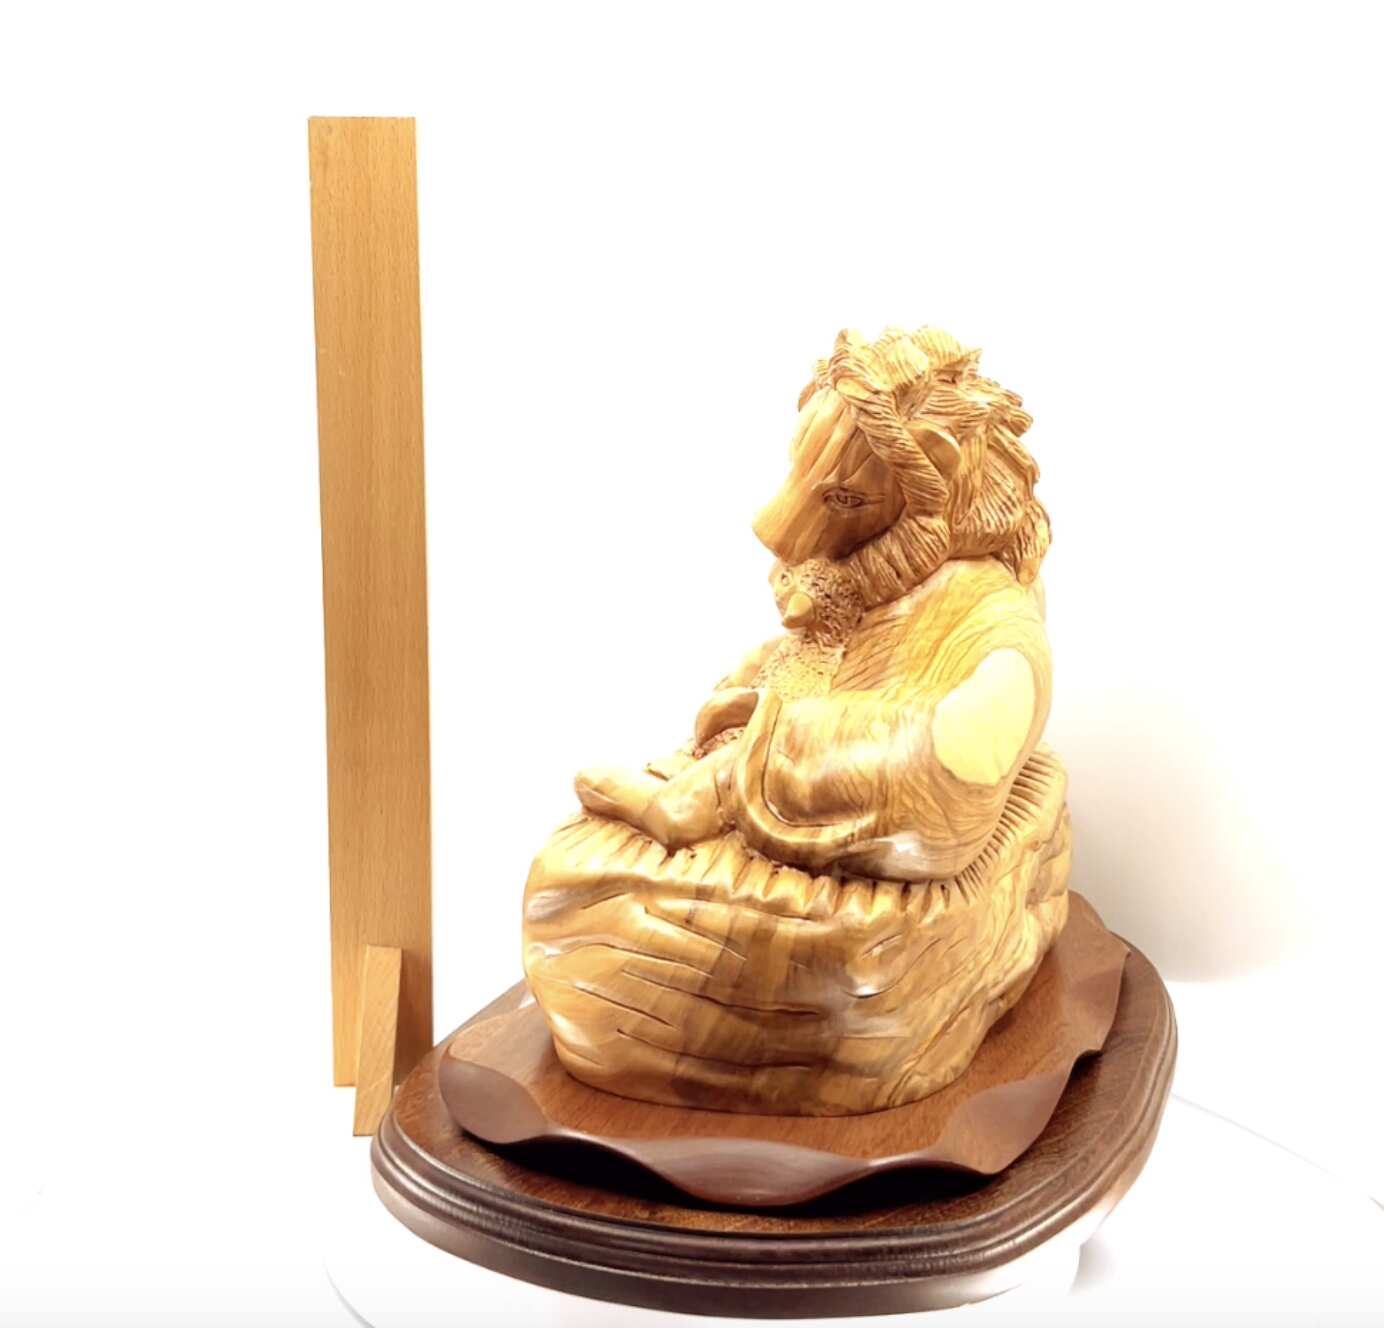 Lion with Lamb and Scripture of Corinthians, 13.8" Masterpiece Wooden Christian Carving